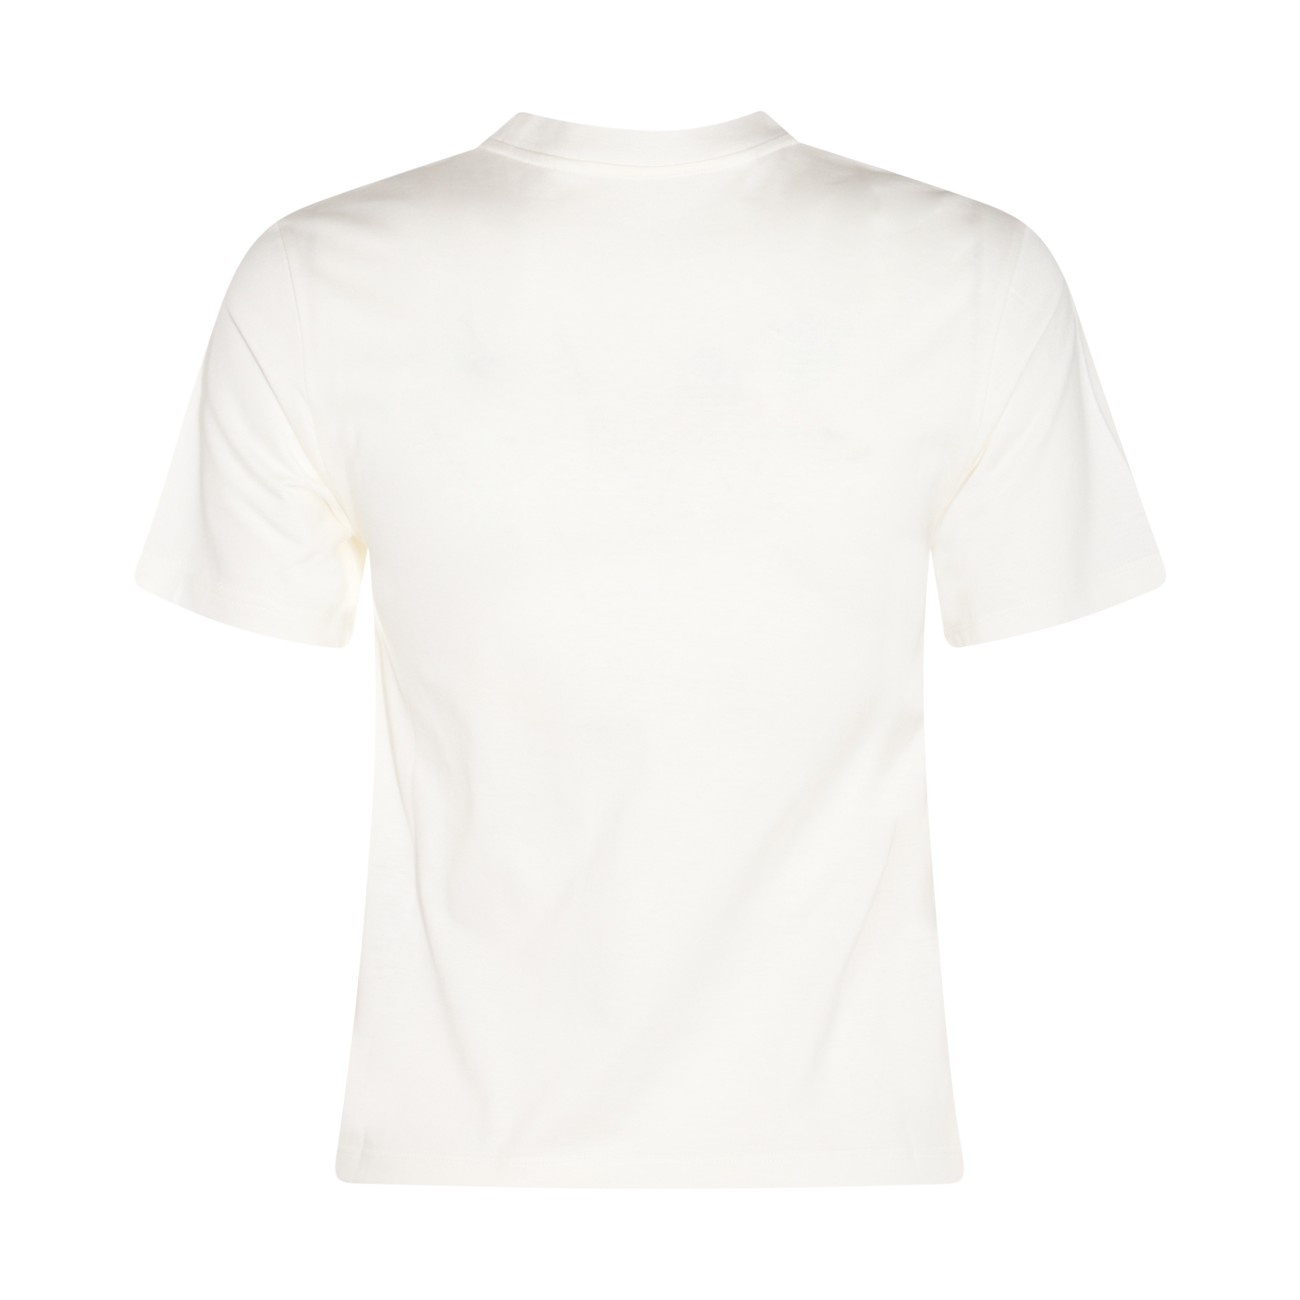 white and black cotton t-shirt - 2